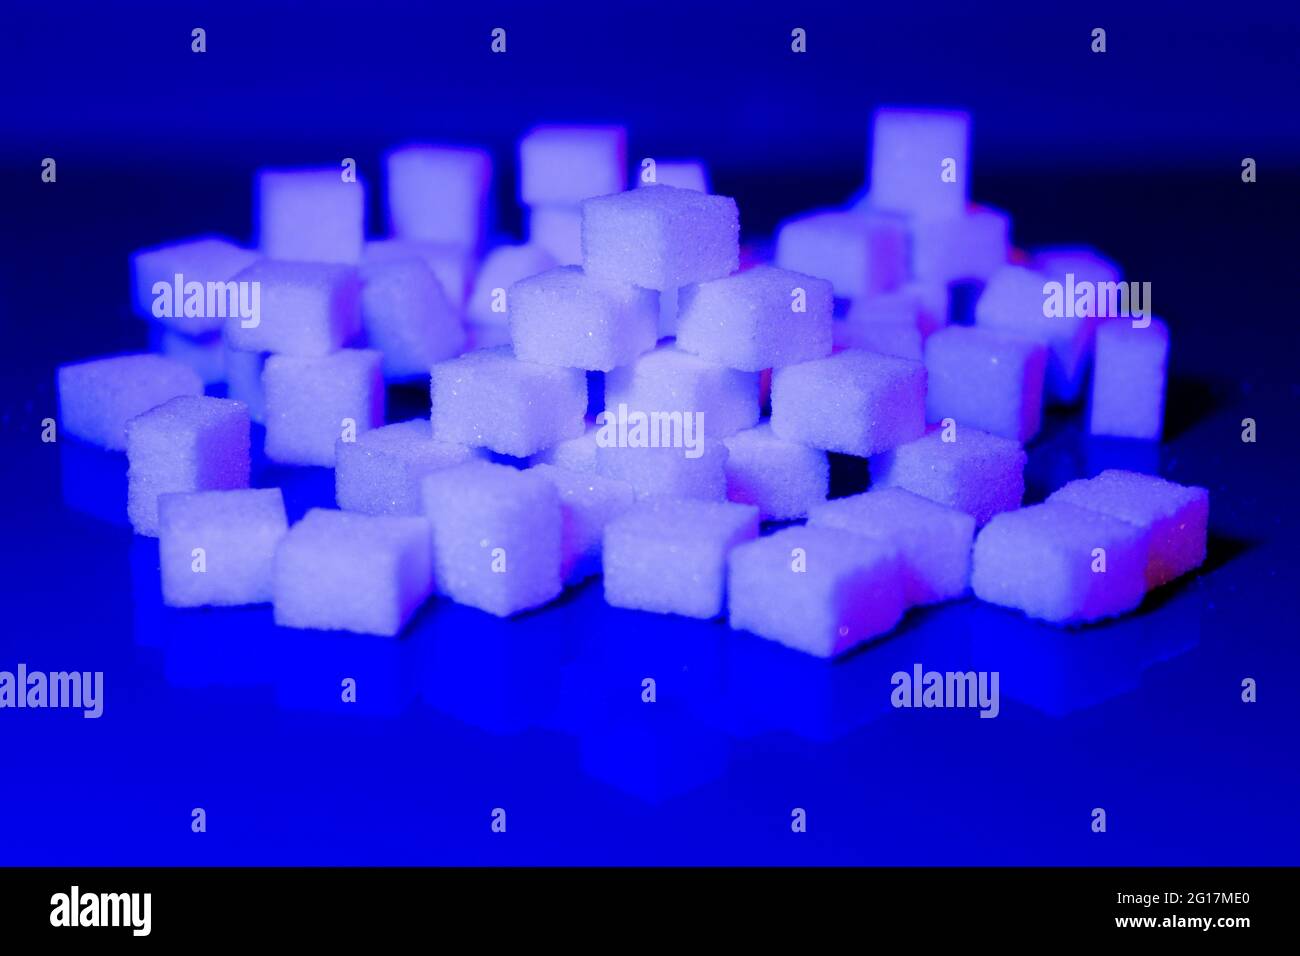 Sugar cubes in different arrangements and colored light. Arrows, Cubes, Pile, Square. Bavaria Germany Stock Photo